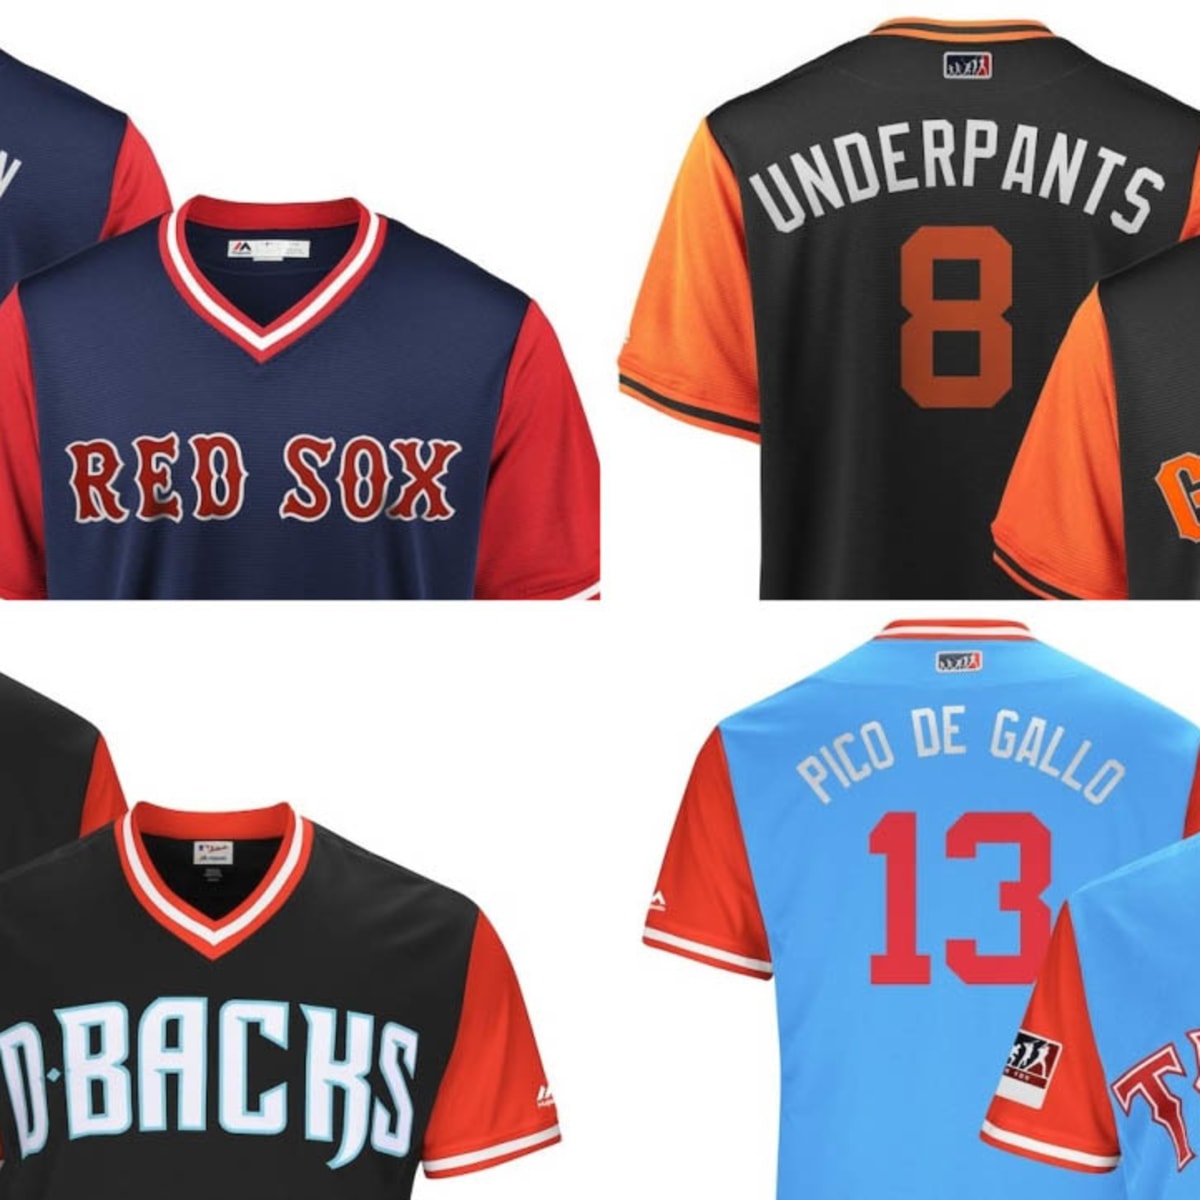 players weekend uniforms 2018